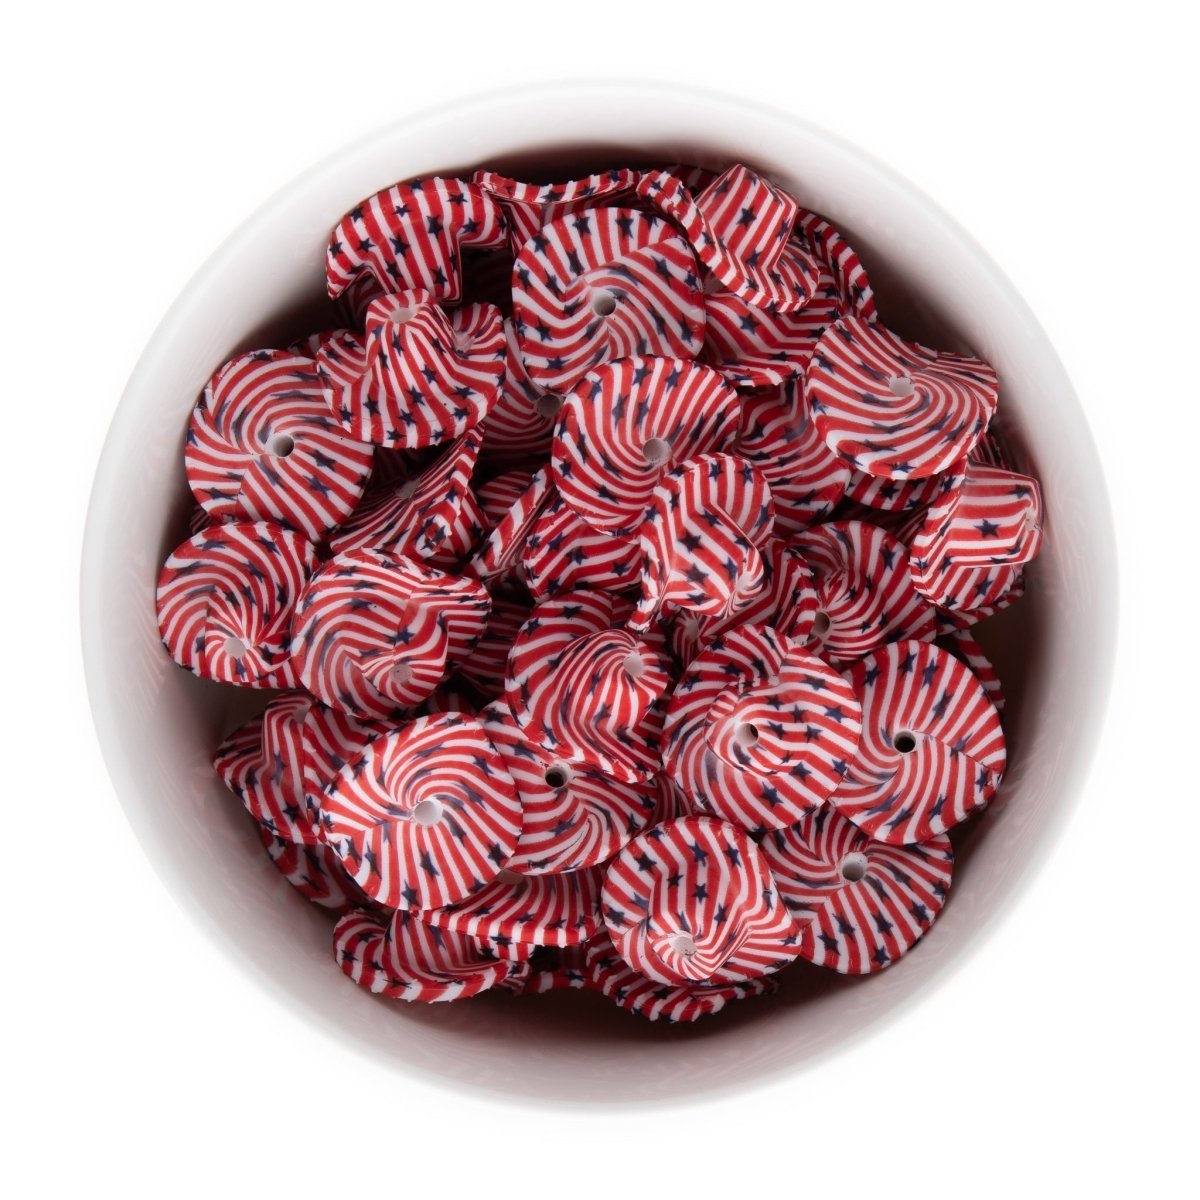 Silicone Focal Beads Cowboy Hats Stars and Stripes Print from Cara & Co Craft Supply